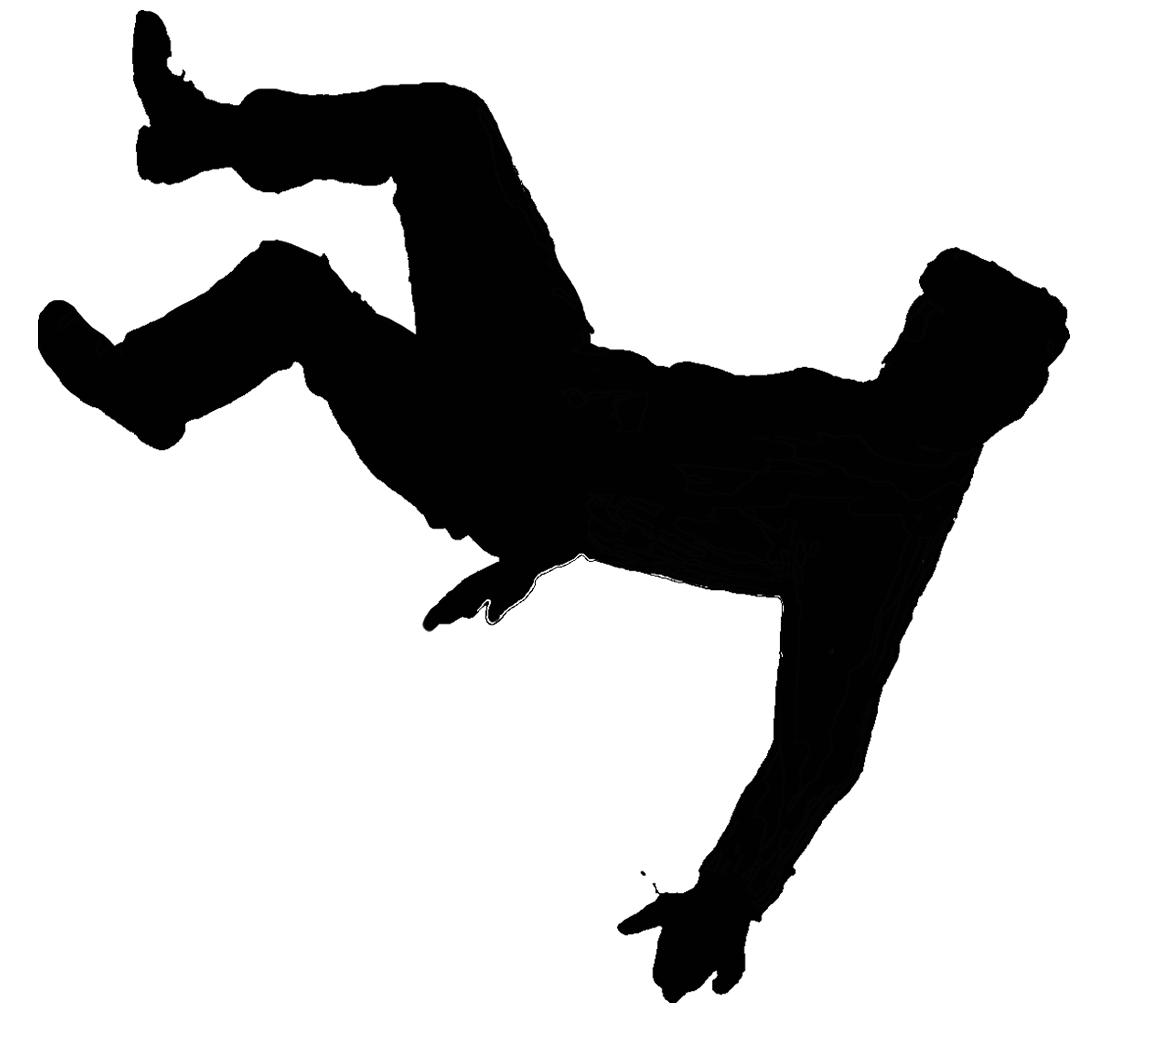 Falling man silhouette at. Jump clipart shadow person